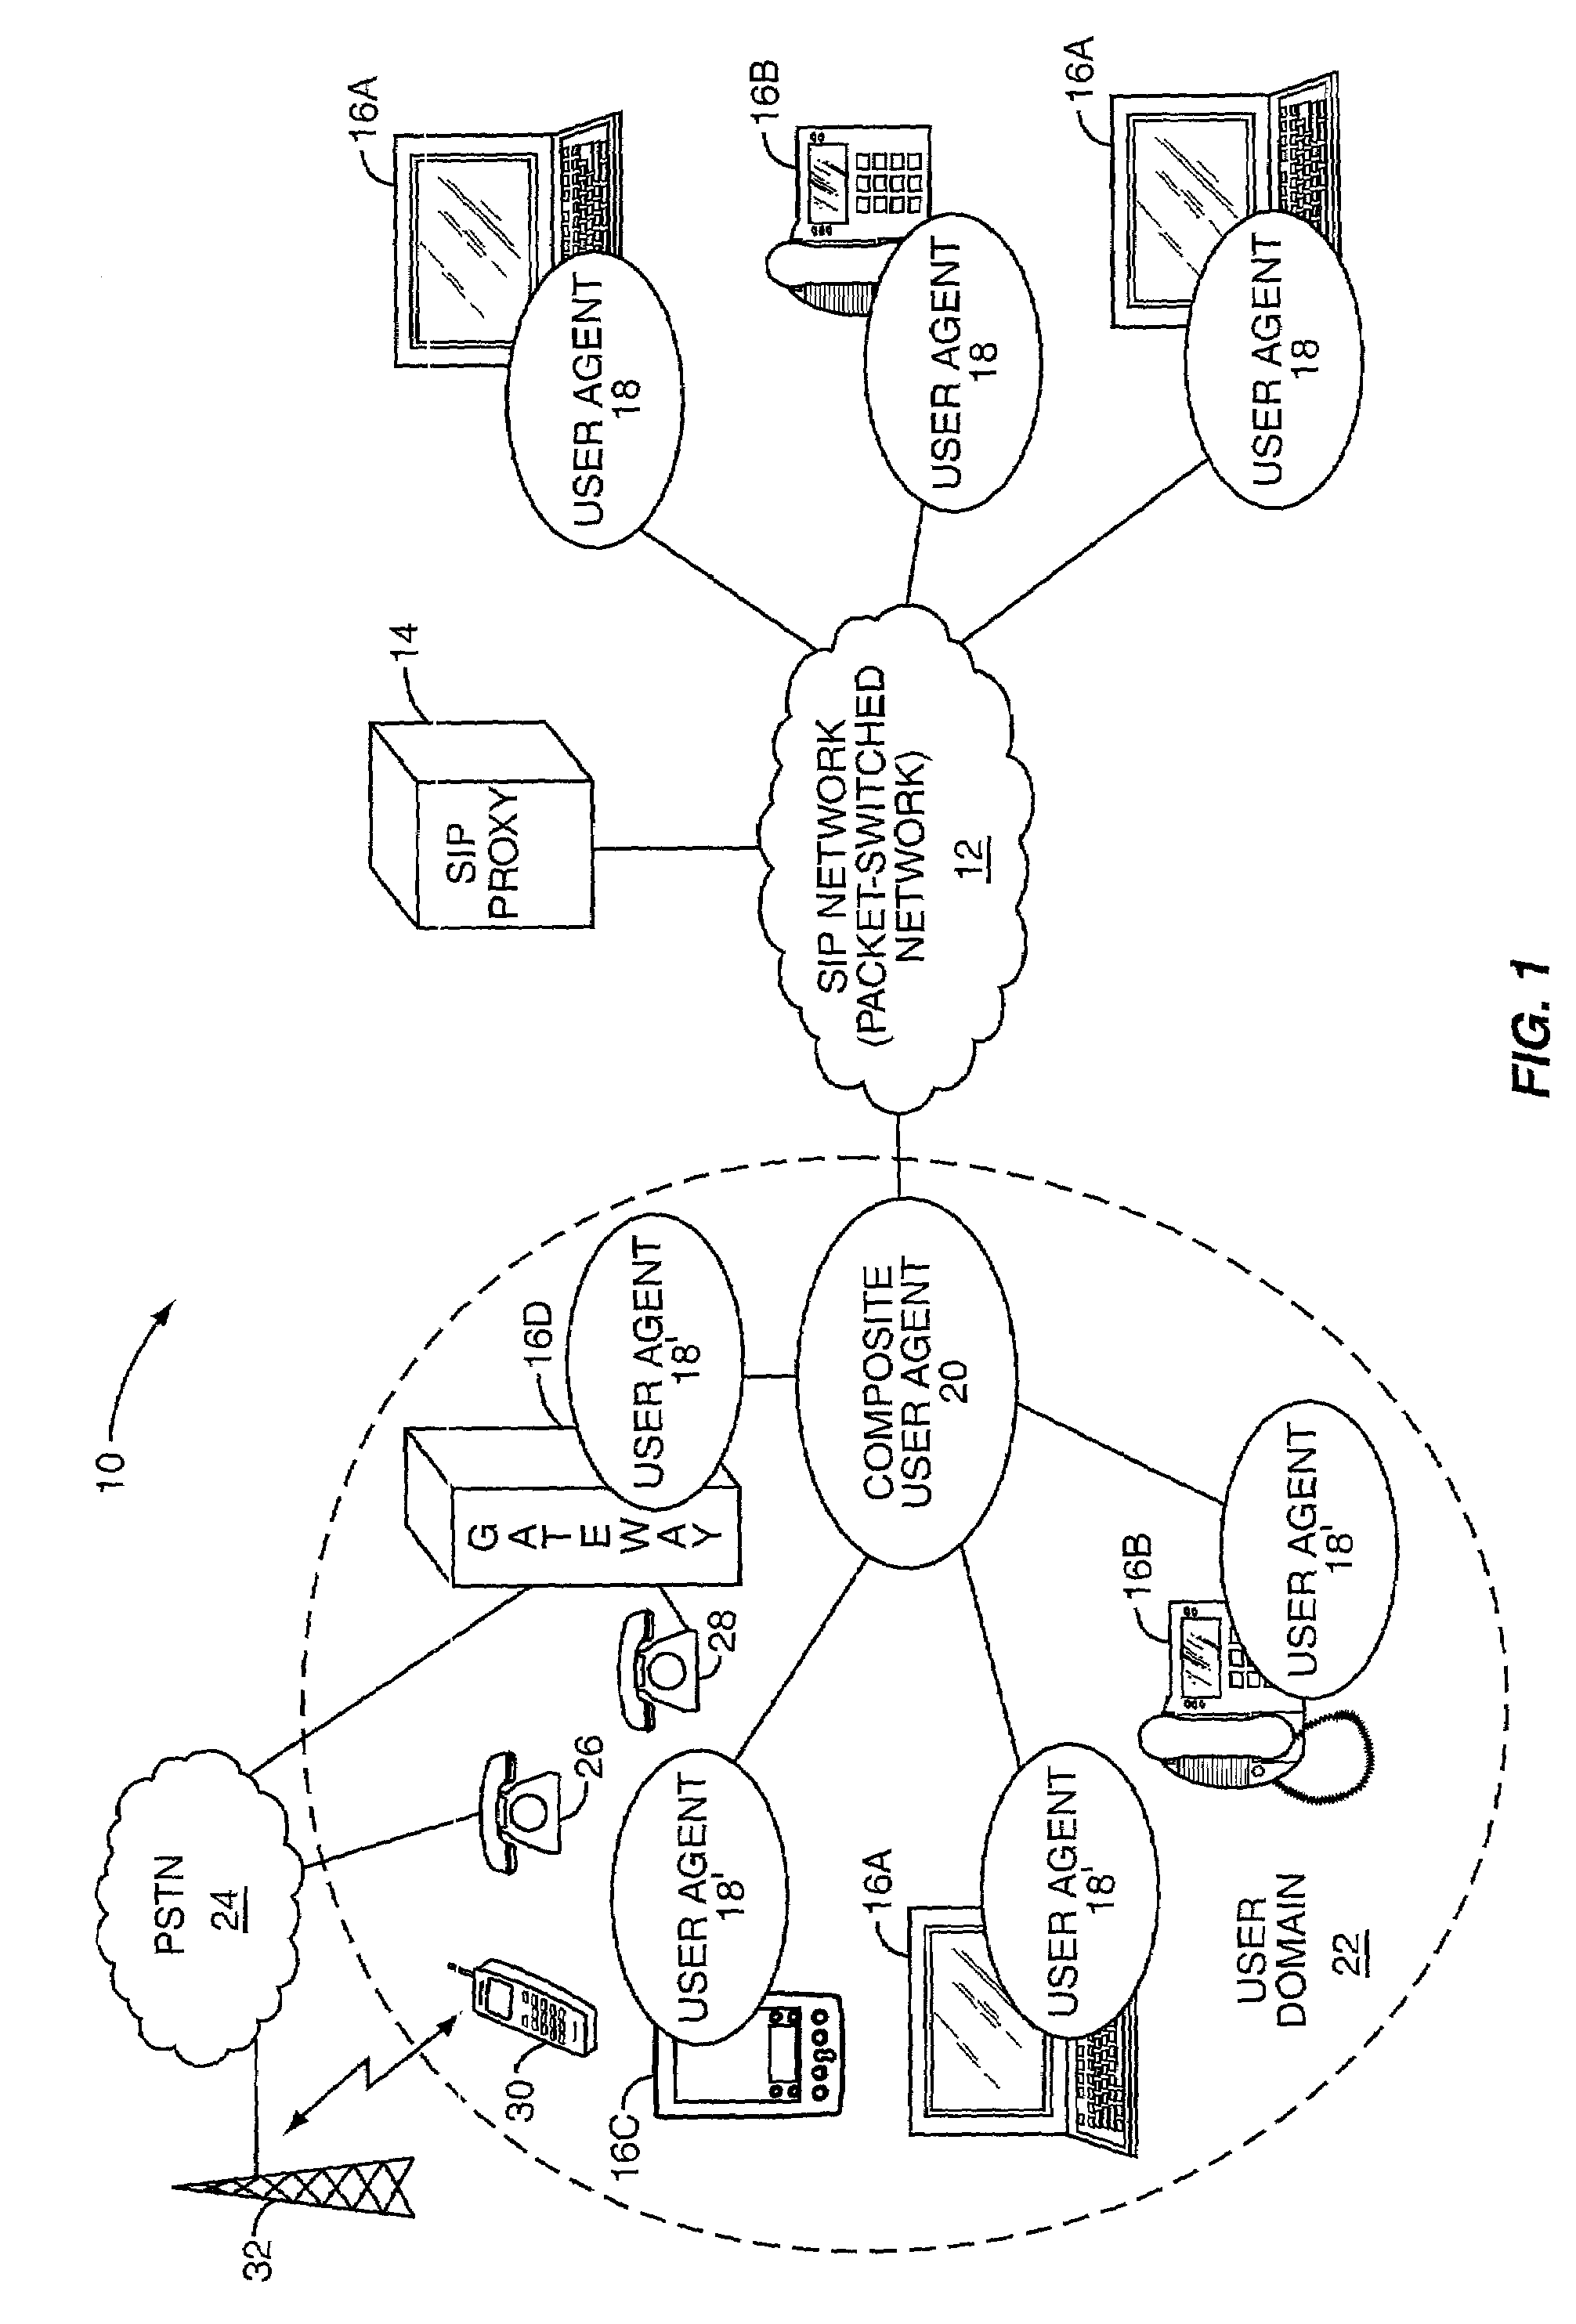 System for routing incoming message to various devices based on media capabilities and type of media session